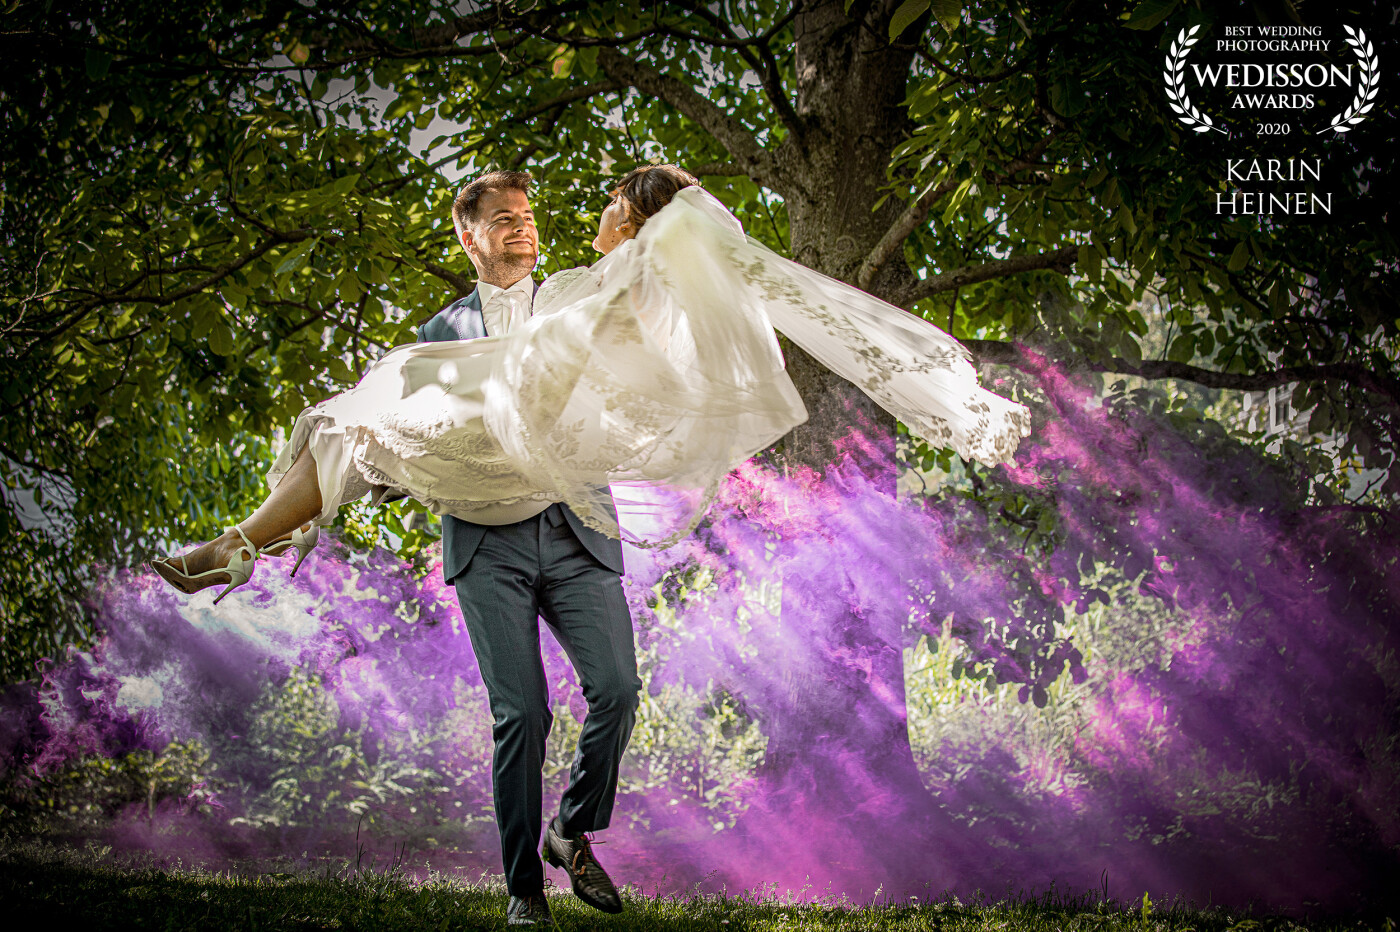 It's amazing how you can play with the sun and your camera. In June 2020 we went with a couple to a beautiful place in the Netherlands. On a field with some trees we tried out smoking bombs as the light beams between the trees were so nice. While the wedding couple was rehearsing their wedding dance, we shot this image of them, with a purple haze on the back. We're so font of matching different things together. In this case: nature/love with art colors/smoke.